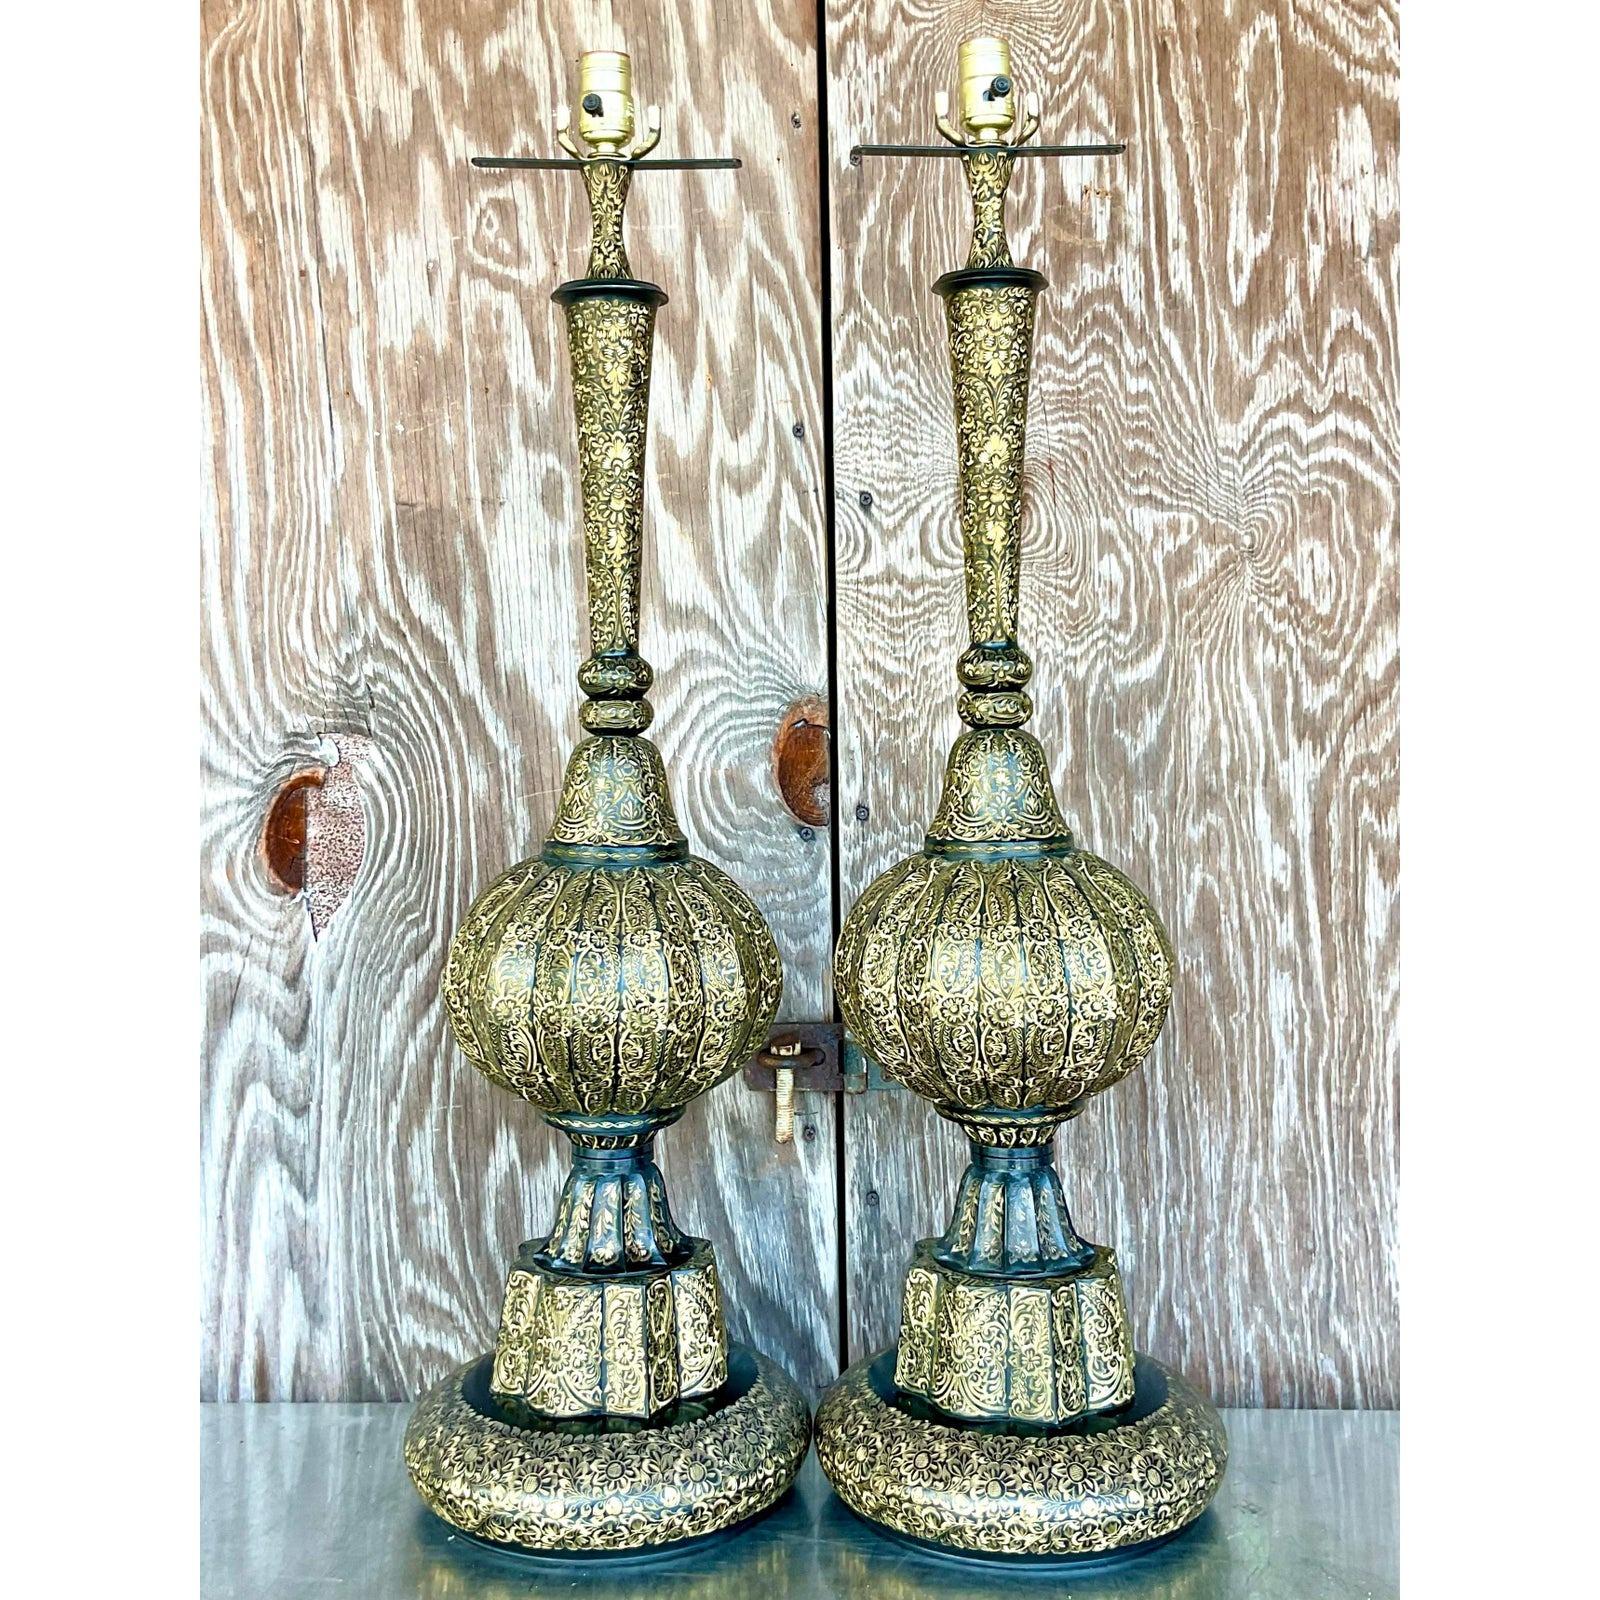 Vintage Boho Moroccan Etched Enamel and Brass Lamps - a Pair For Sale 3